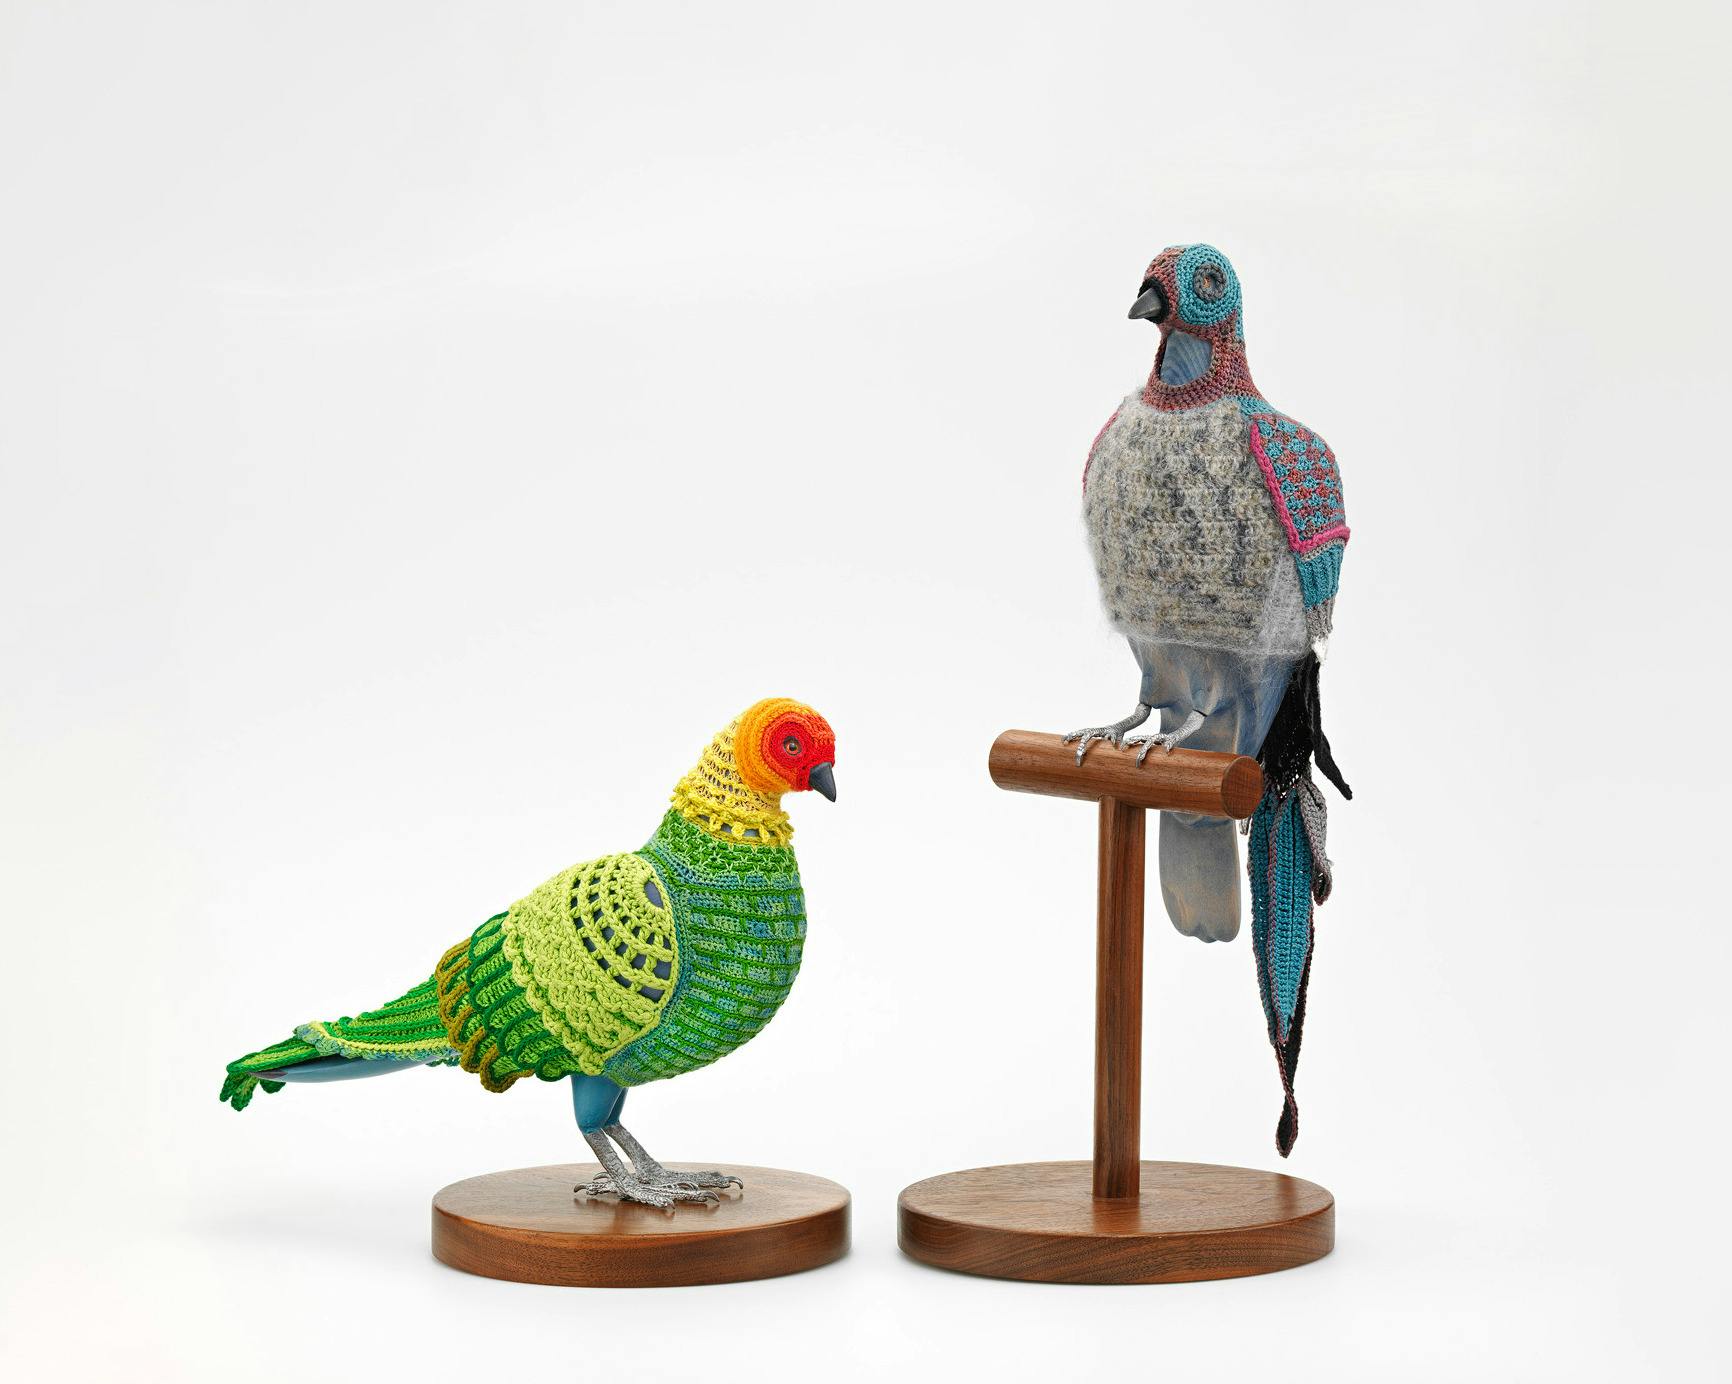 Two artworks, Biodiversity Reclamation Suits, by artist Laurel Roth Hope. Left: a crocheted suit with green, yellow, and red patterns on a pigeon mannequin. Right: another mannequin in a blue, gray, and red crochet suit. Both mannequins are mounted on round wooden bases."